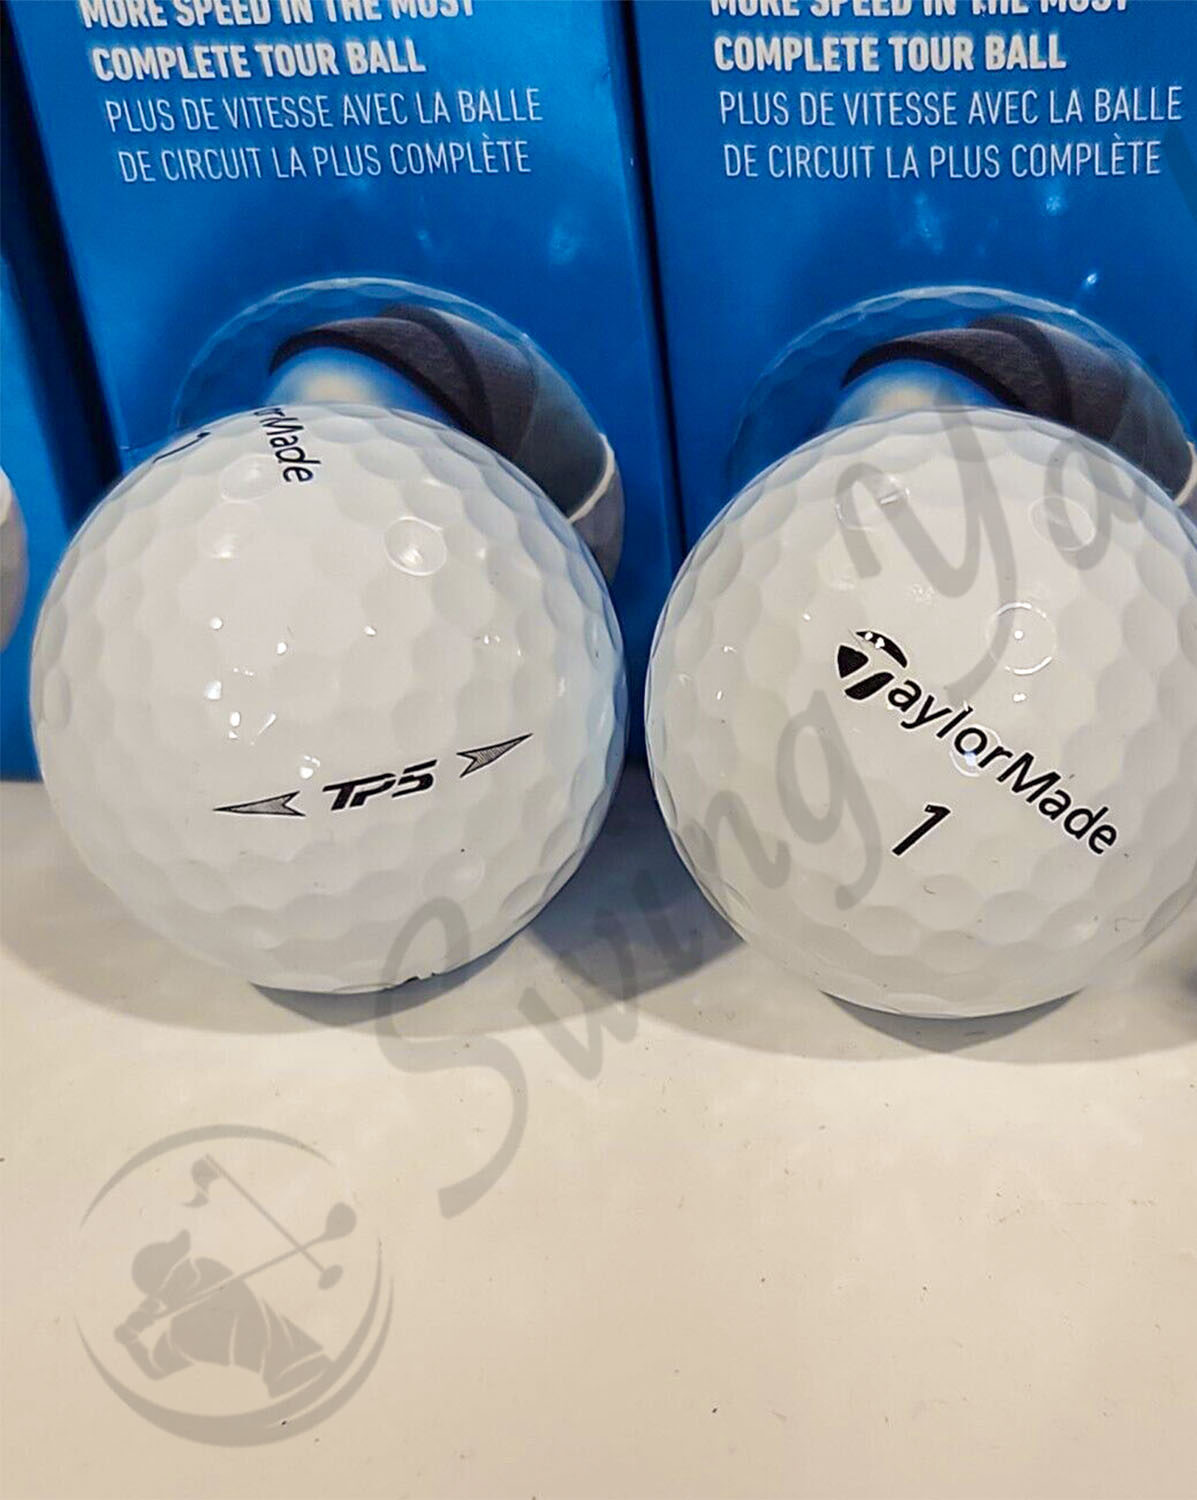 My new TaylorMade TP5 balls on the table